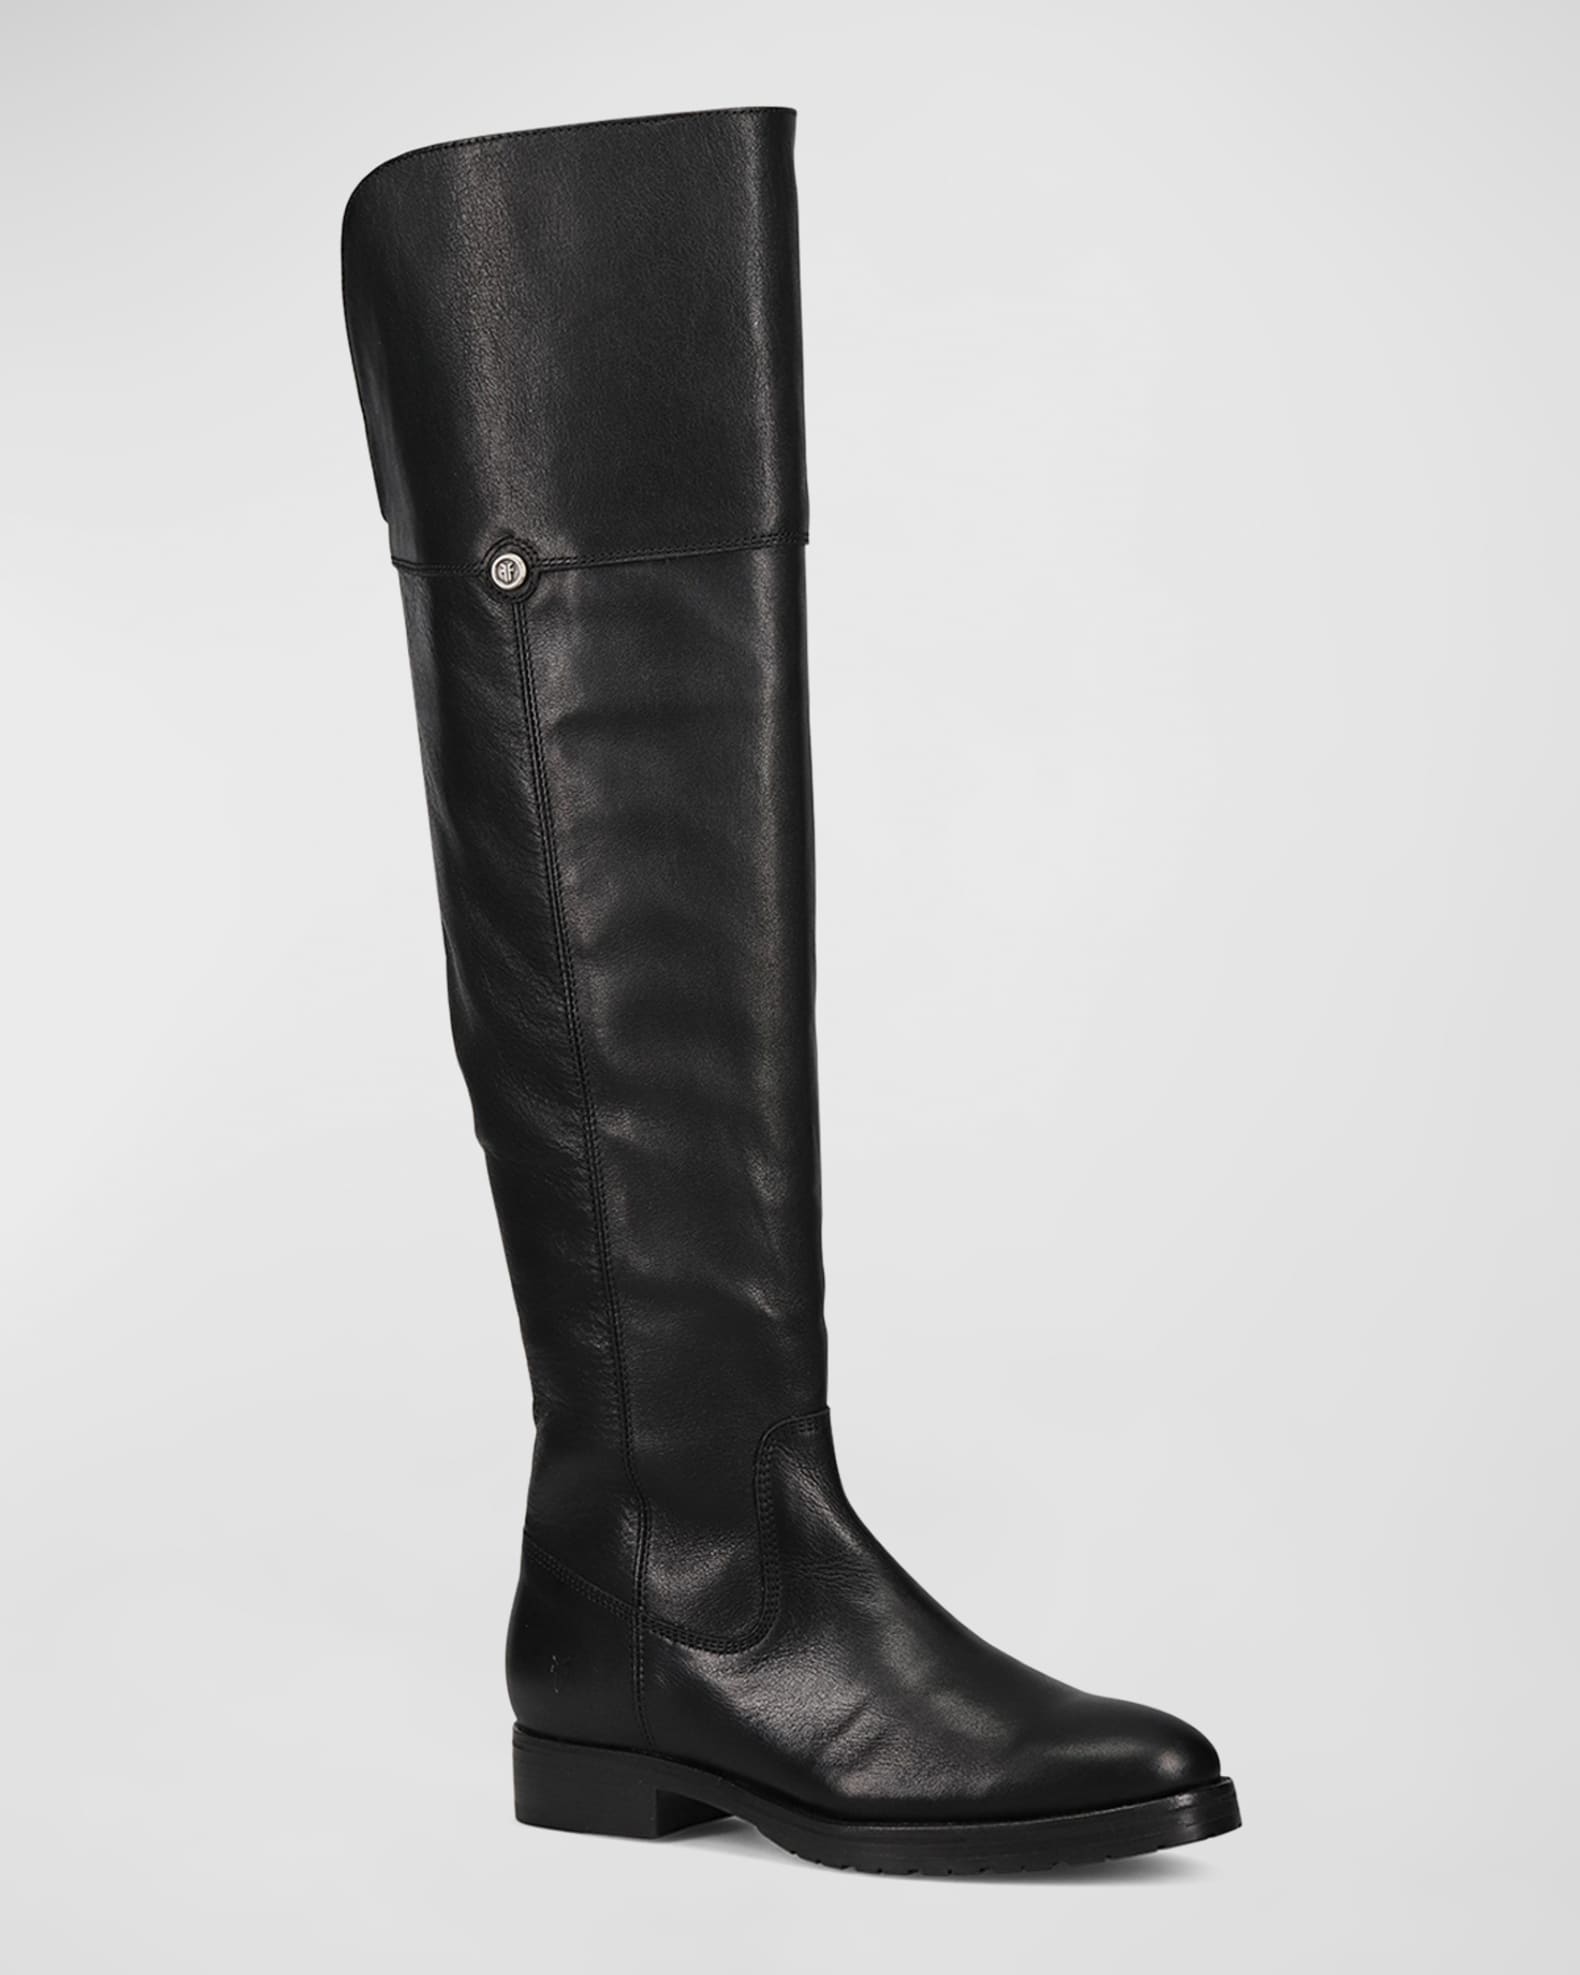 Frye Melissa Leather Over-The-Knee Boots | Neiman Marcus